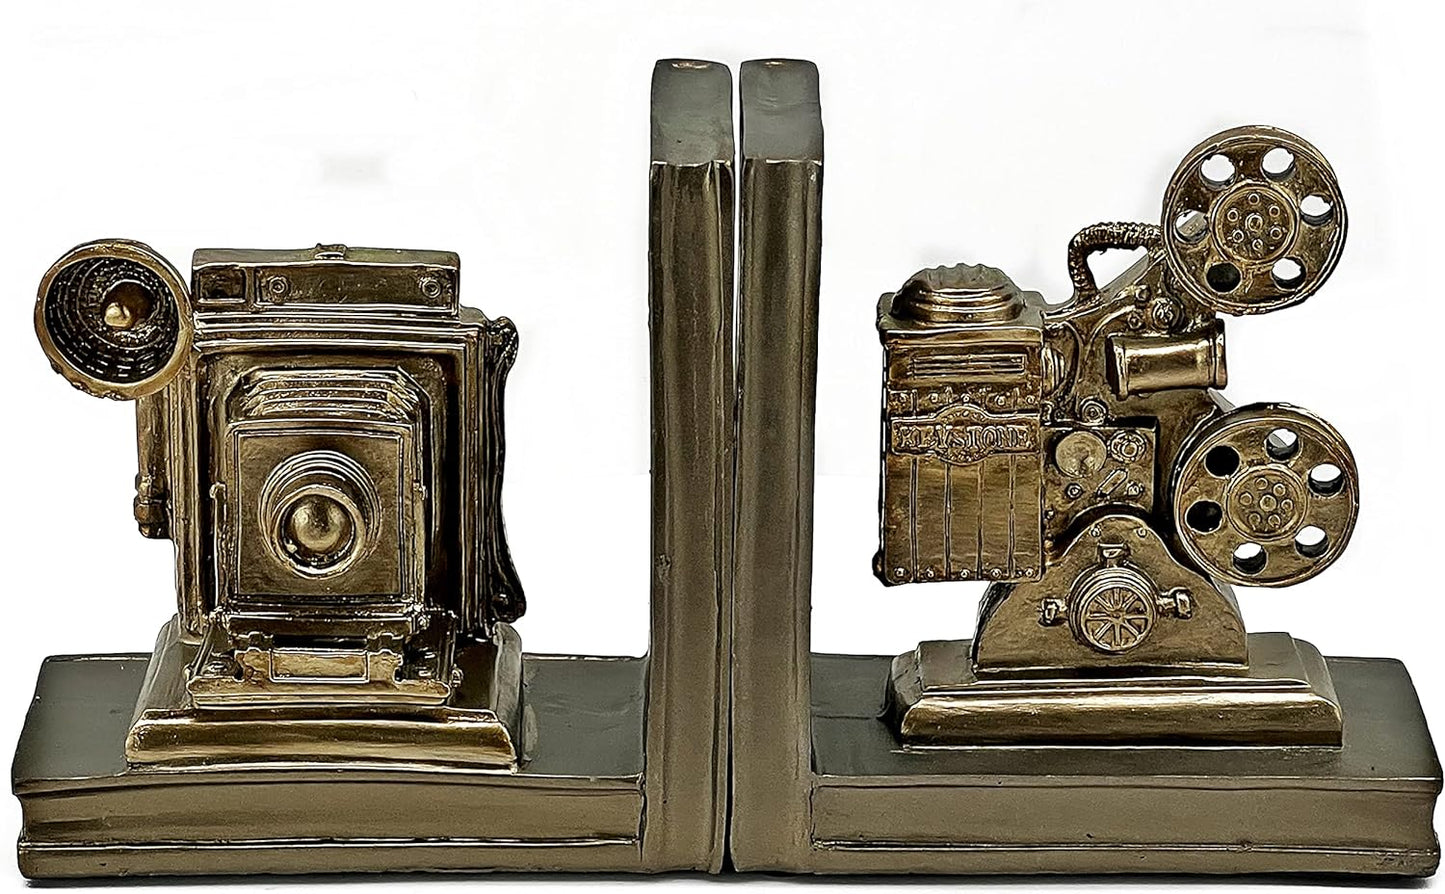 Decorative Bookends Vintage Camera Projector Book Ends Statues Office Library Bookshelves Support Artist Designer Photographer Art Director Creative Gifts Antiques Boho Farmhouse Home Decor